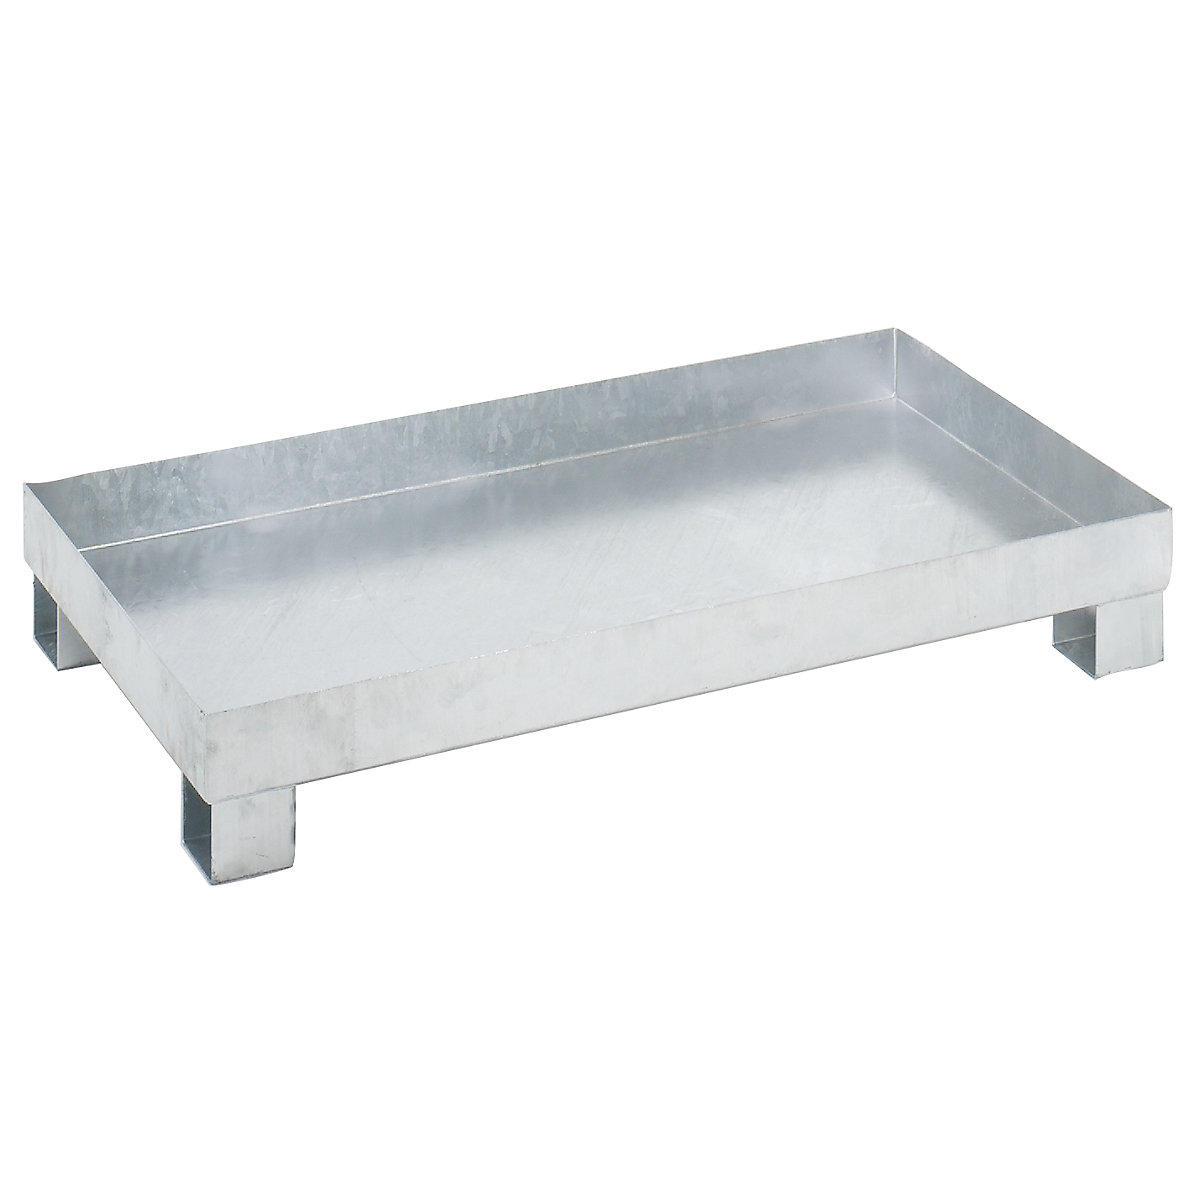 Sump tray for 60 l – eurokraft basic, LxWxH 800 x 1300 x 205 mm, with certification, hot dip galvanised, without grate-4